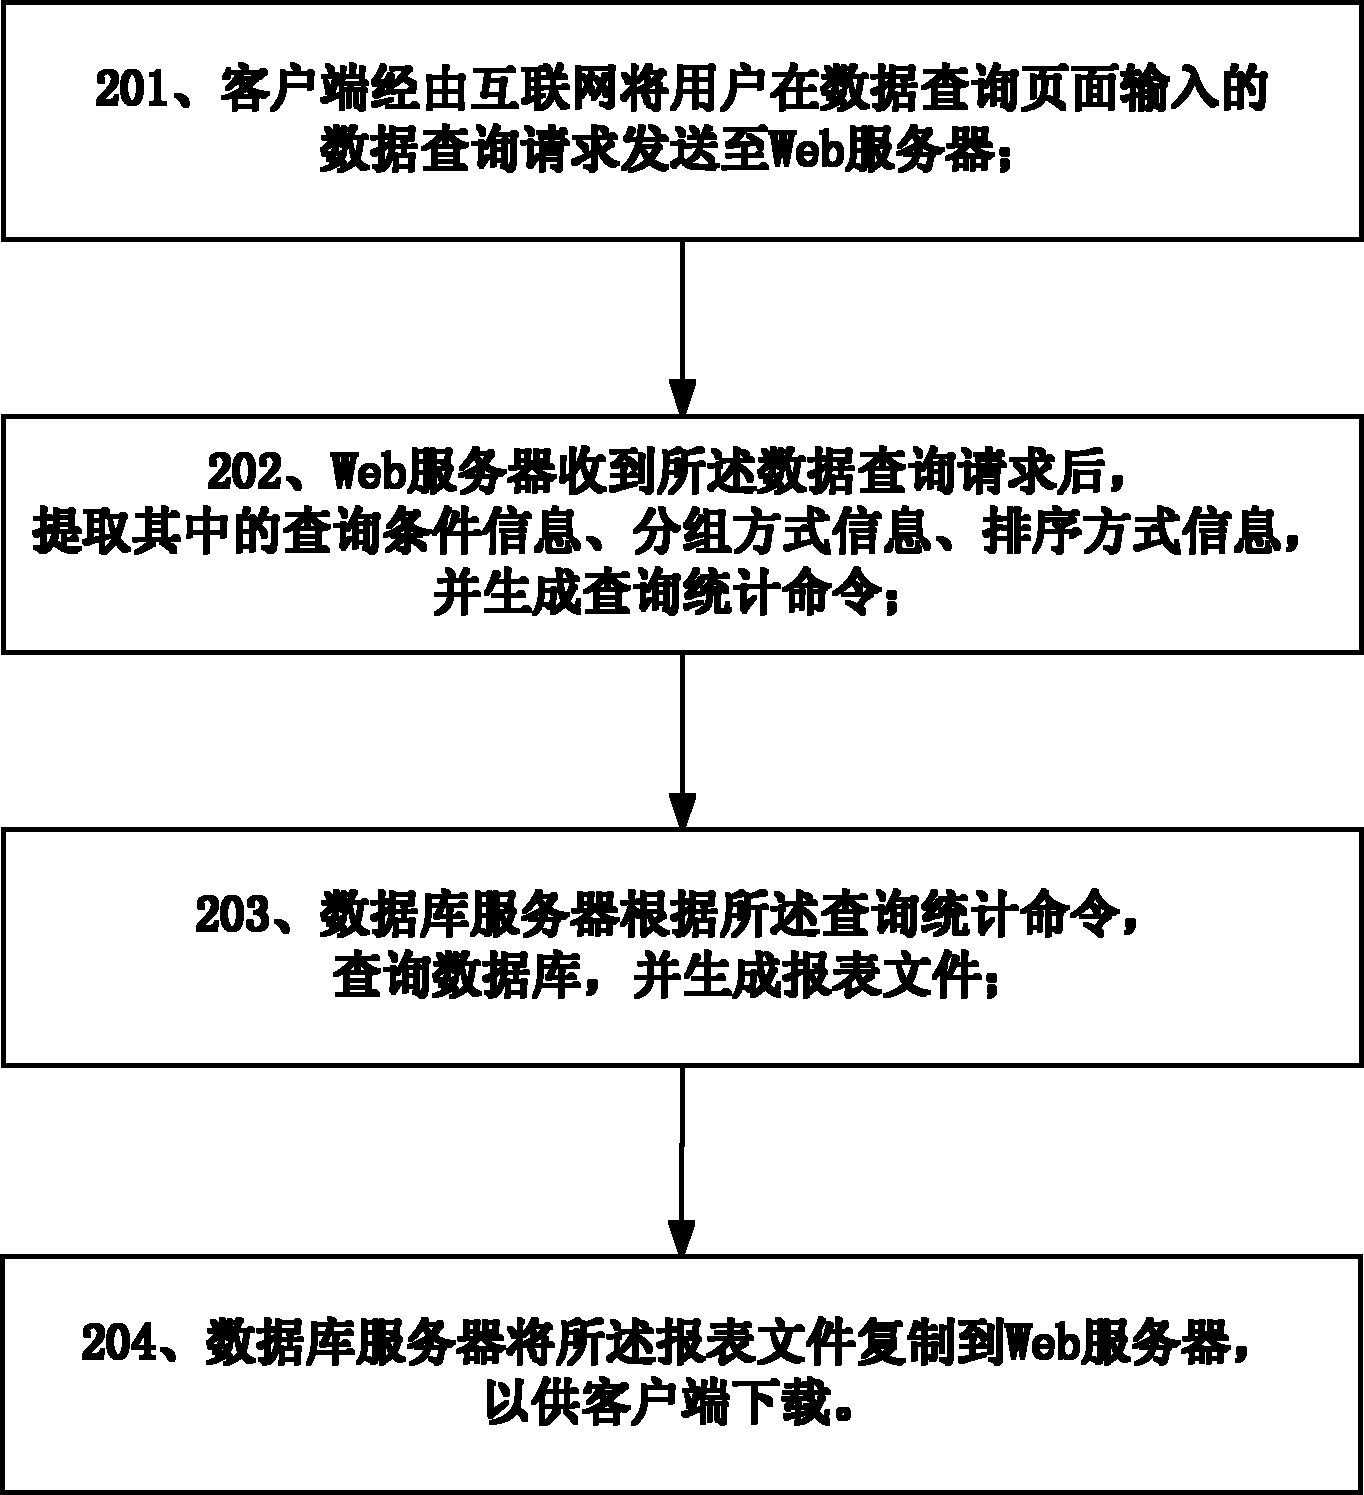 Method and system for querying data and exporting report